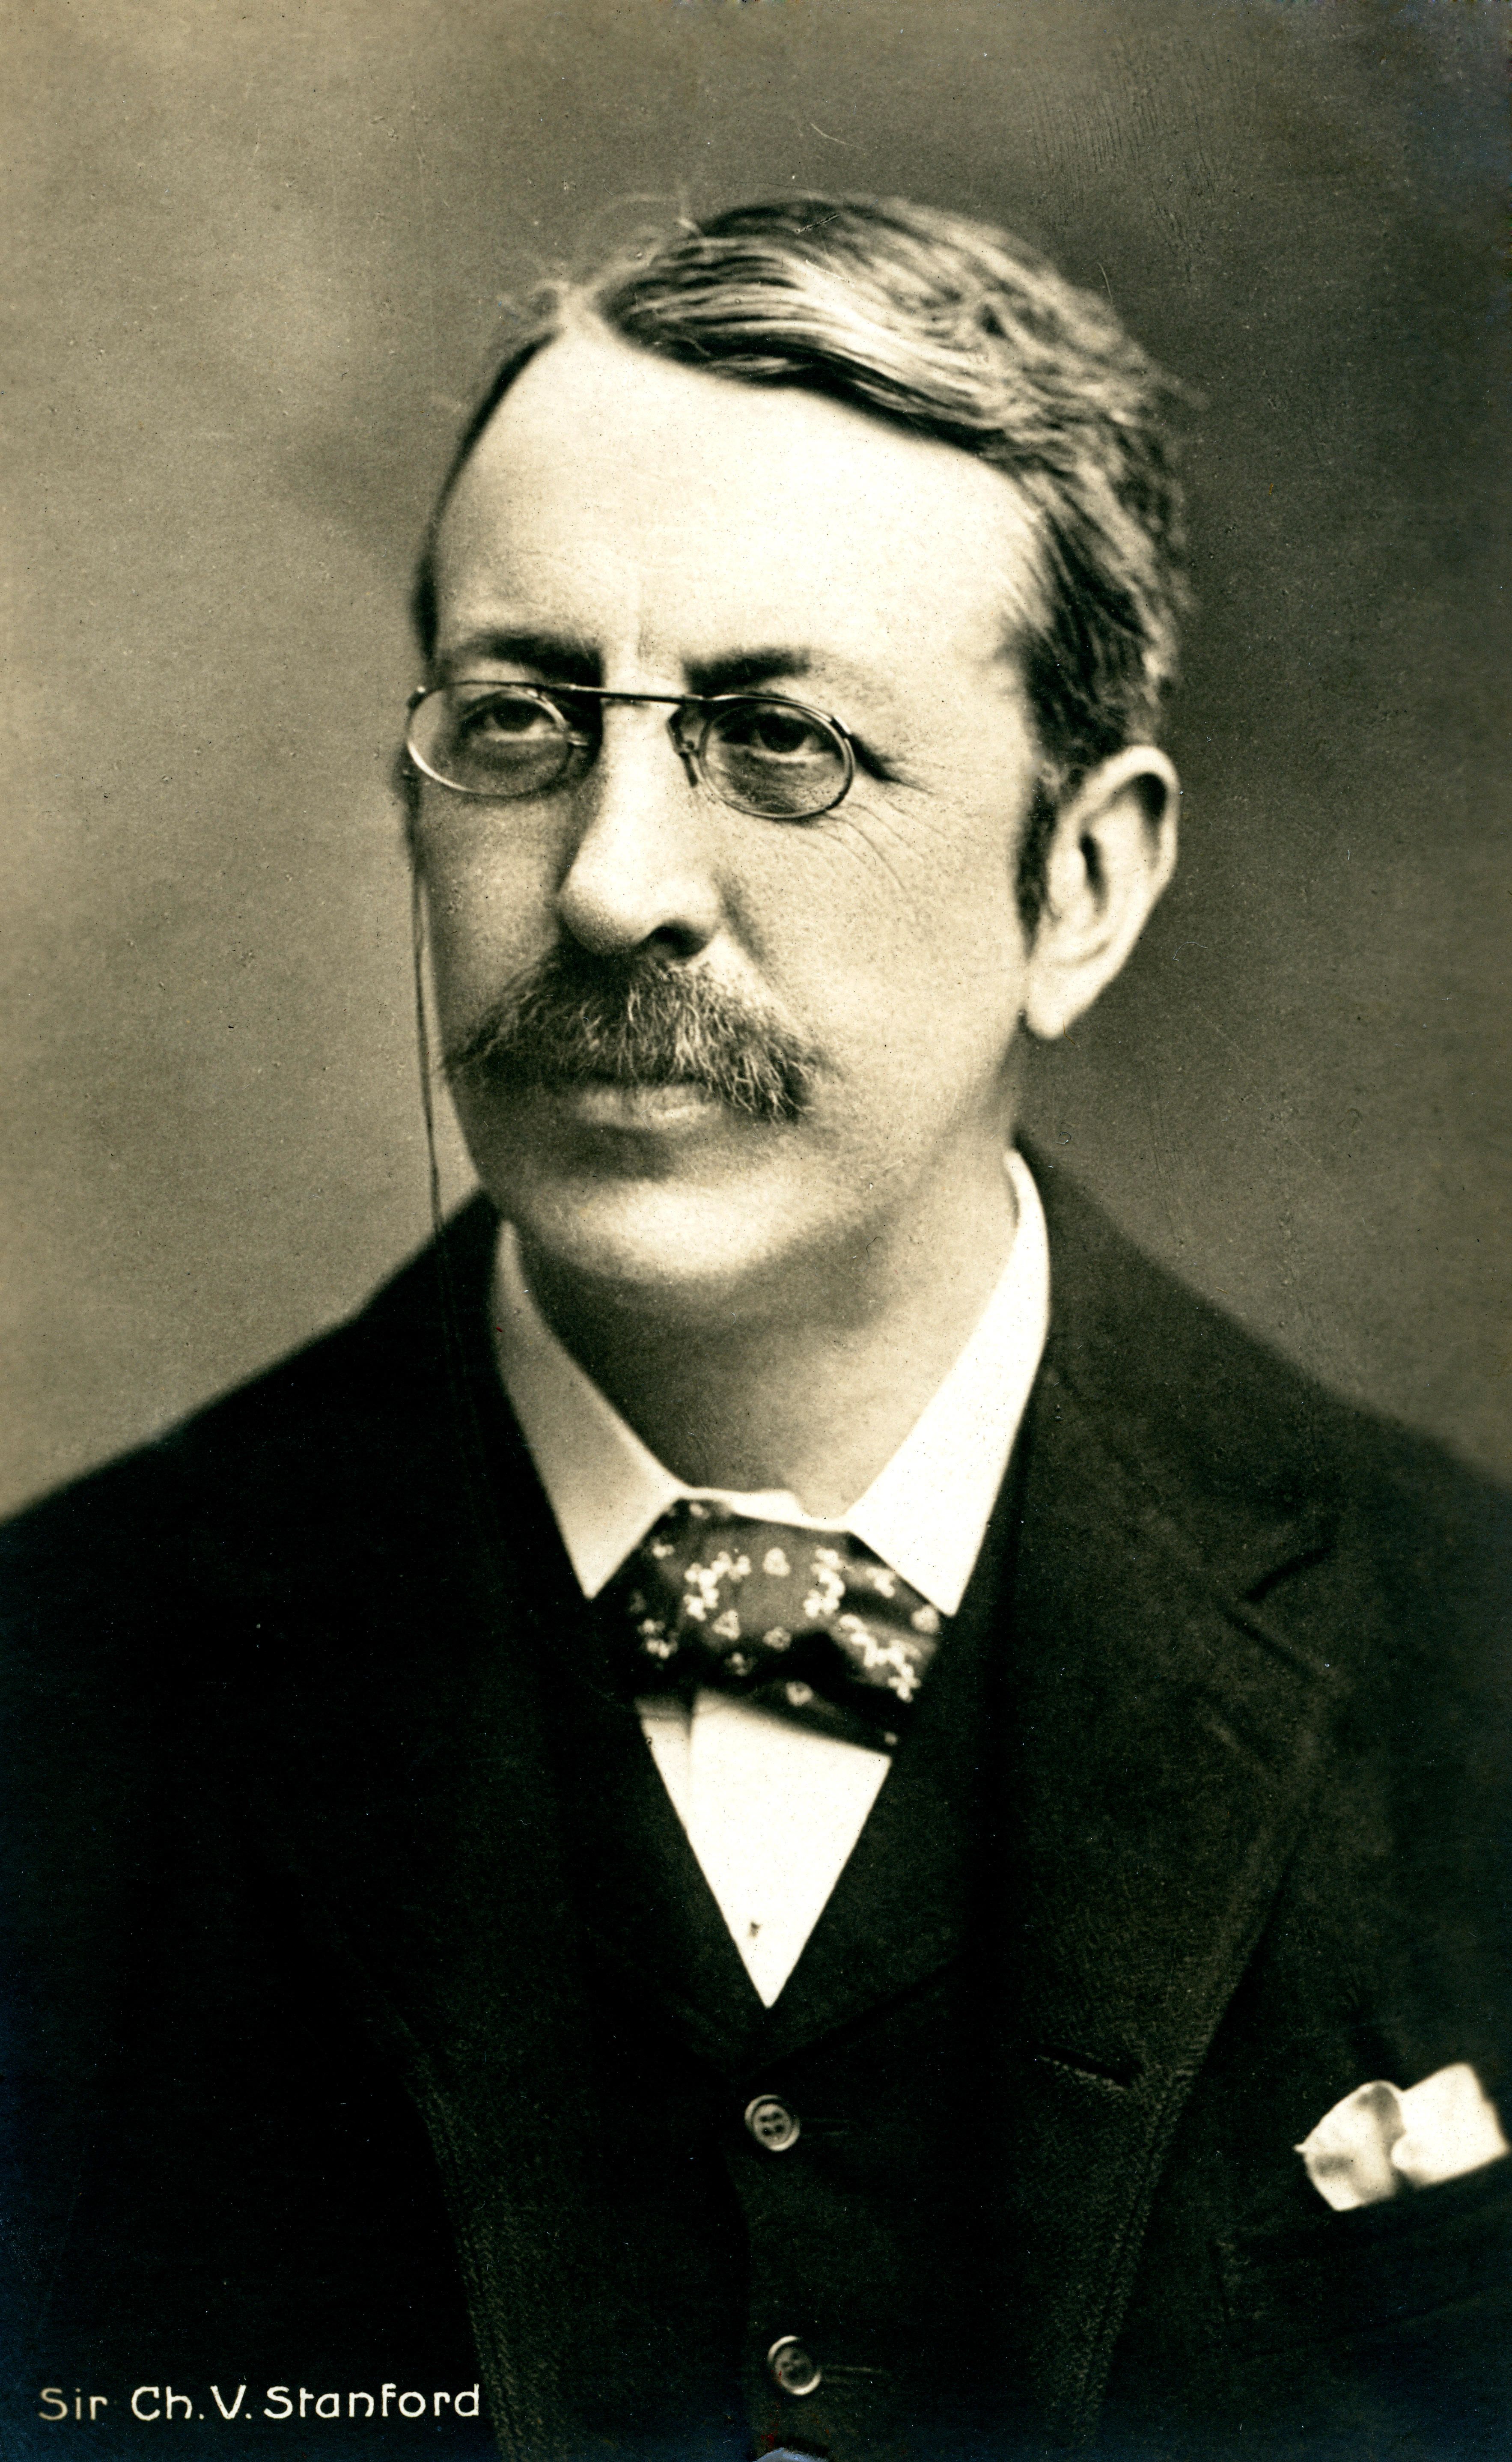 An old photograph of Charles Villiers Stanford, a man with a moustache and small glasses